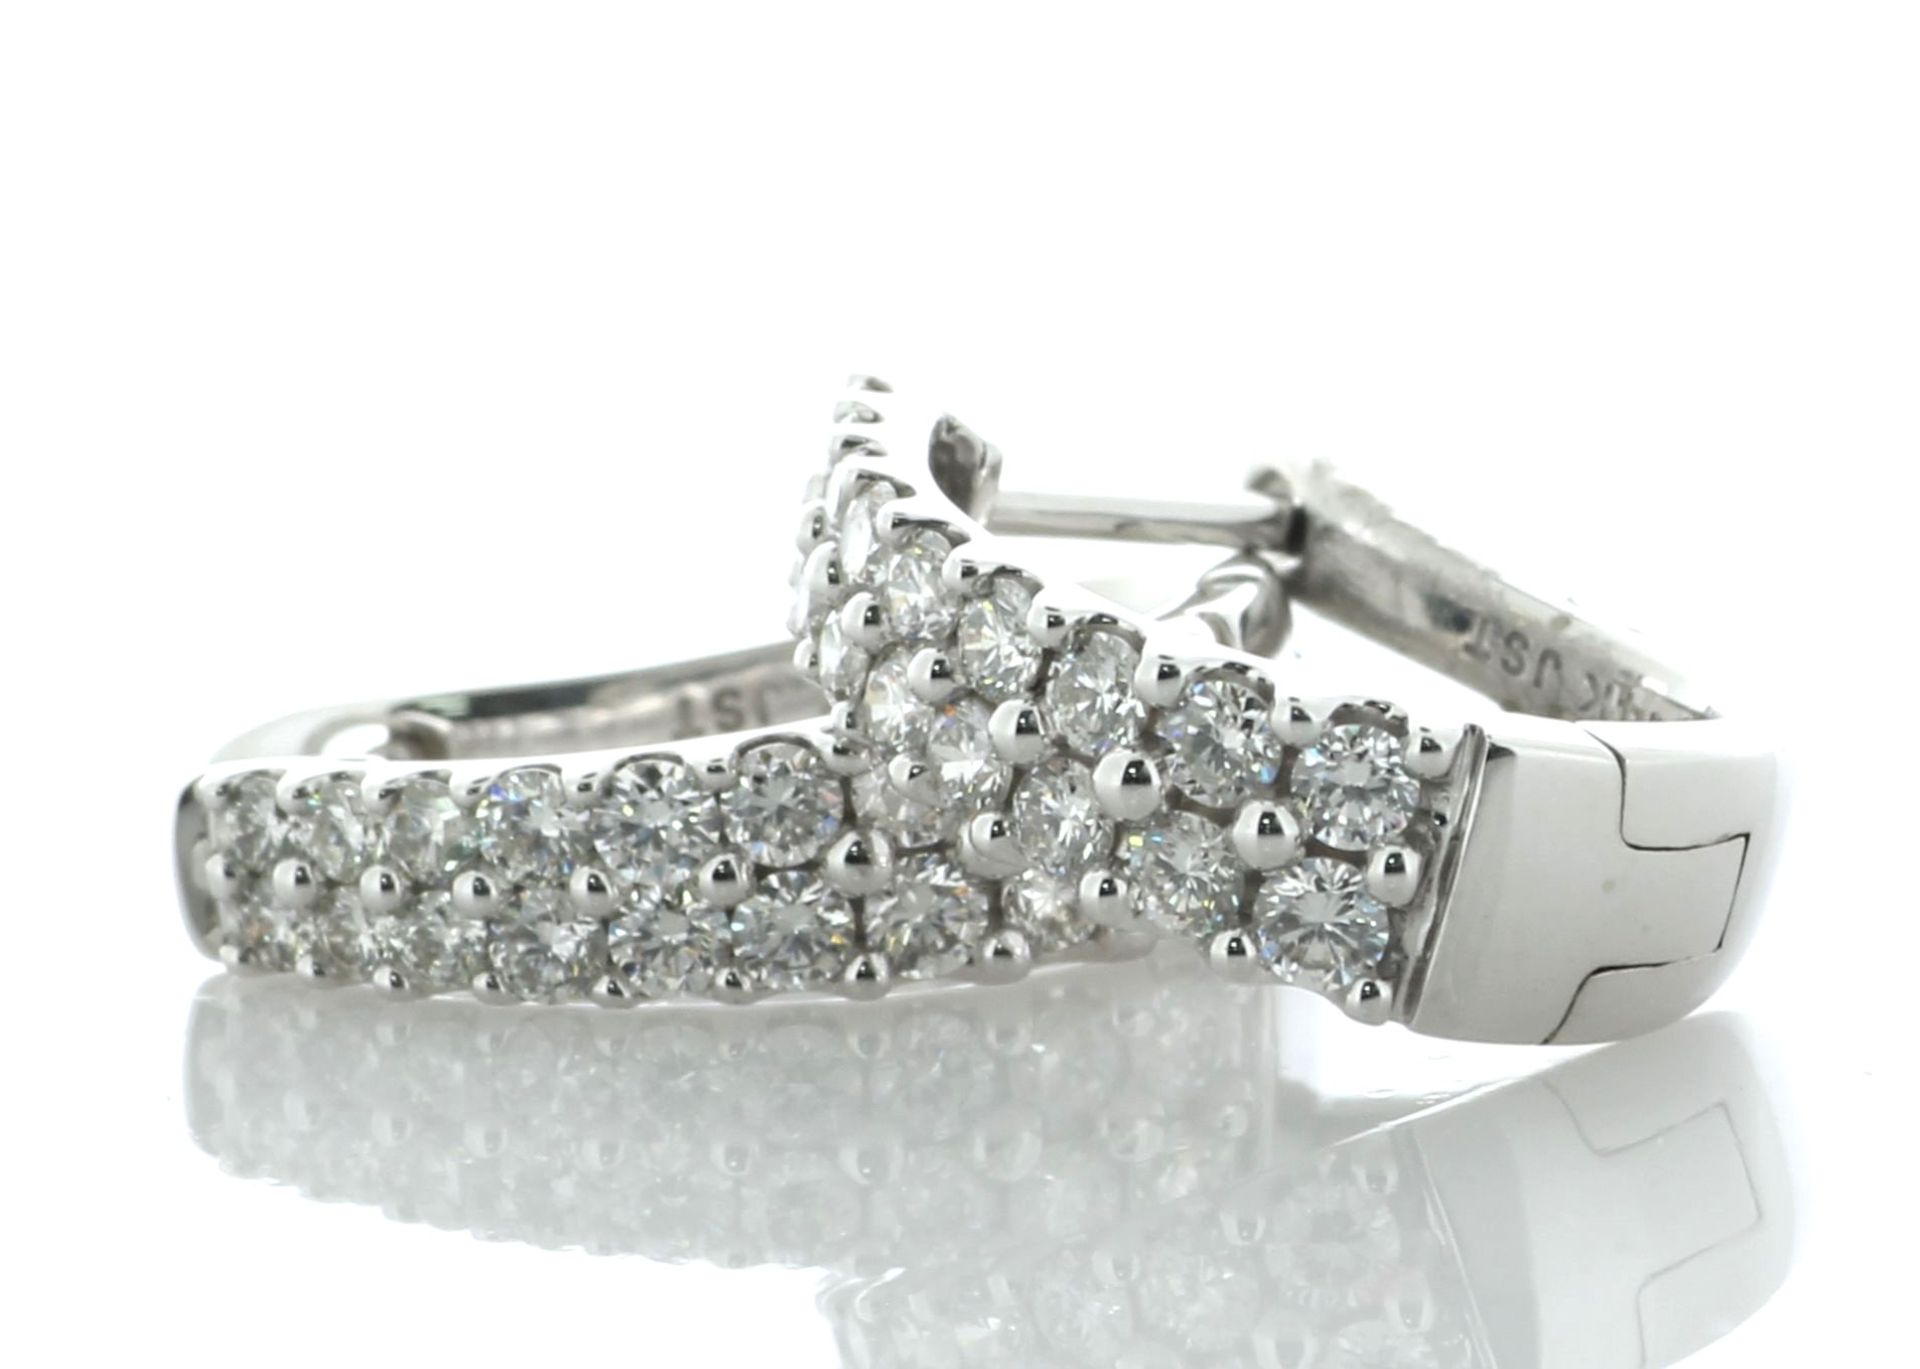 14ct White Gold Diamond Hoop Earrings 1.00 Carats - Valued By AGI £4,900.00 - A gorgeous pair of